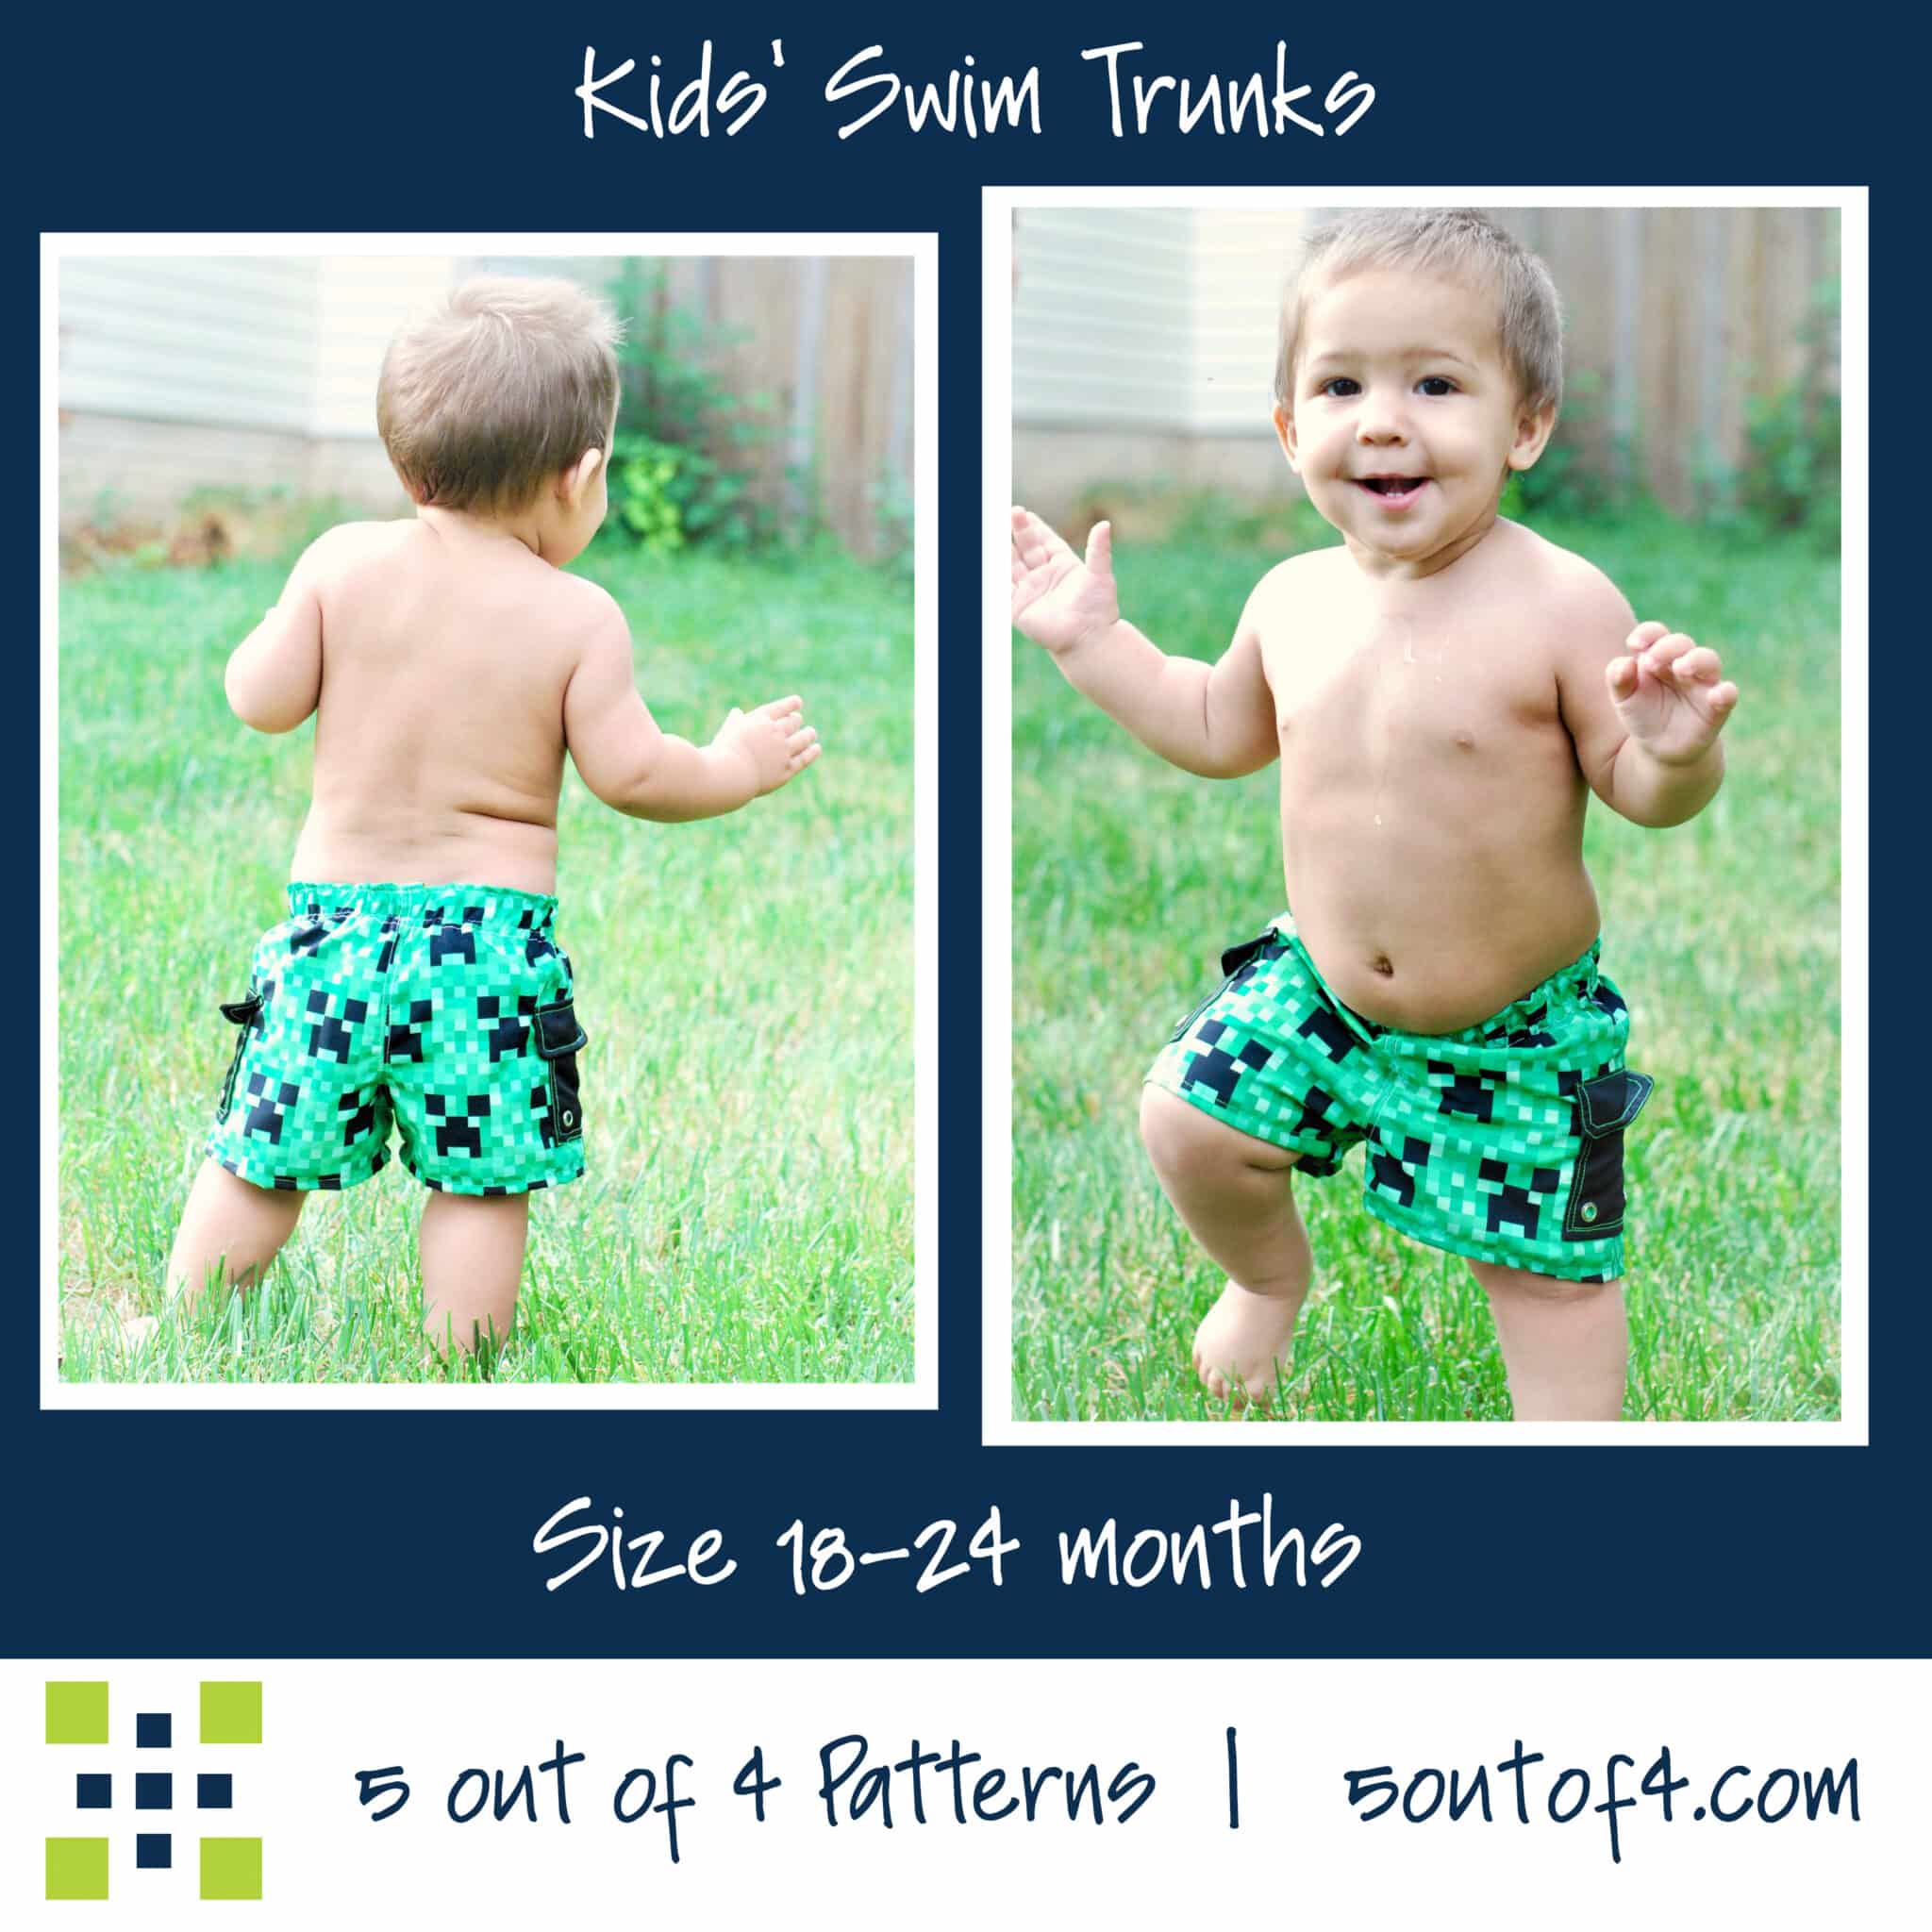 KVMV Pattern with Toys and Kids for Kindergarten 5size Beach Shorts